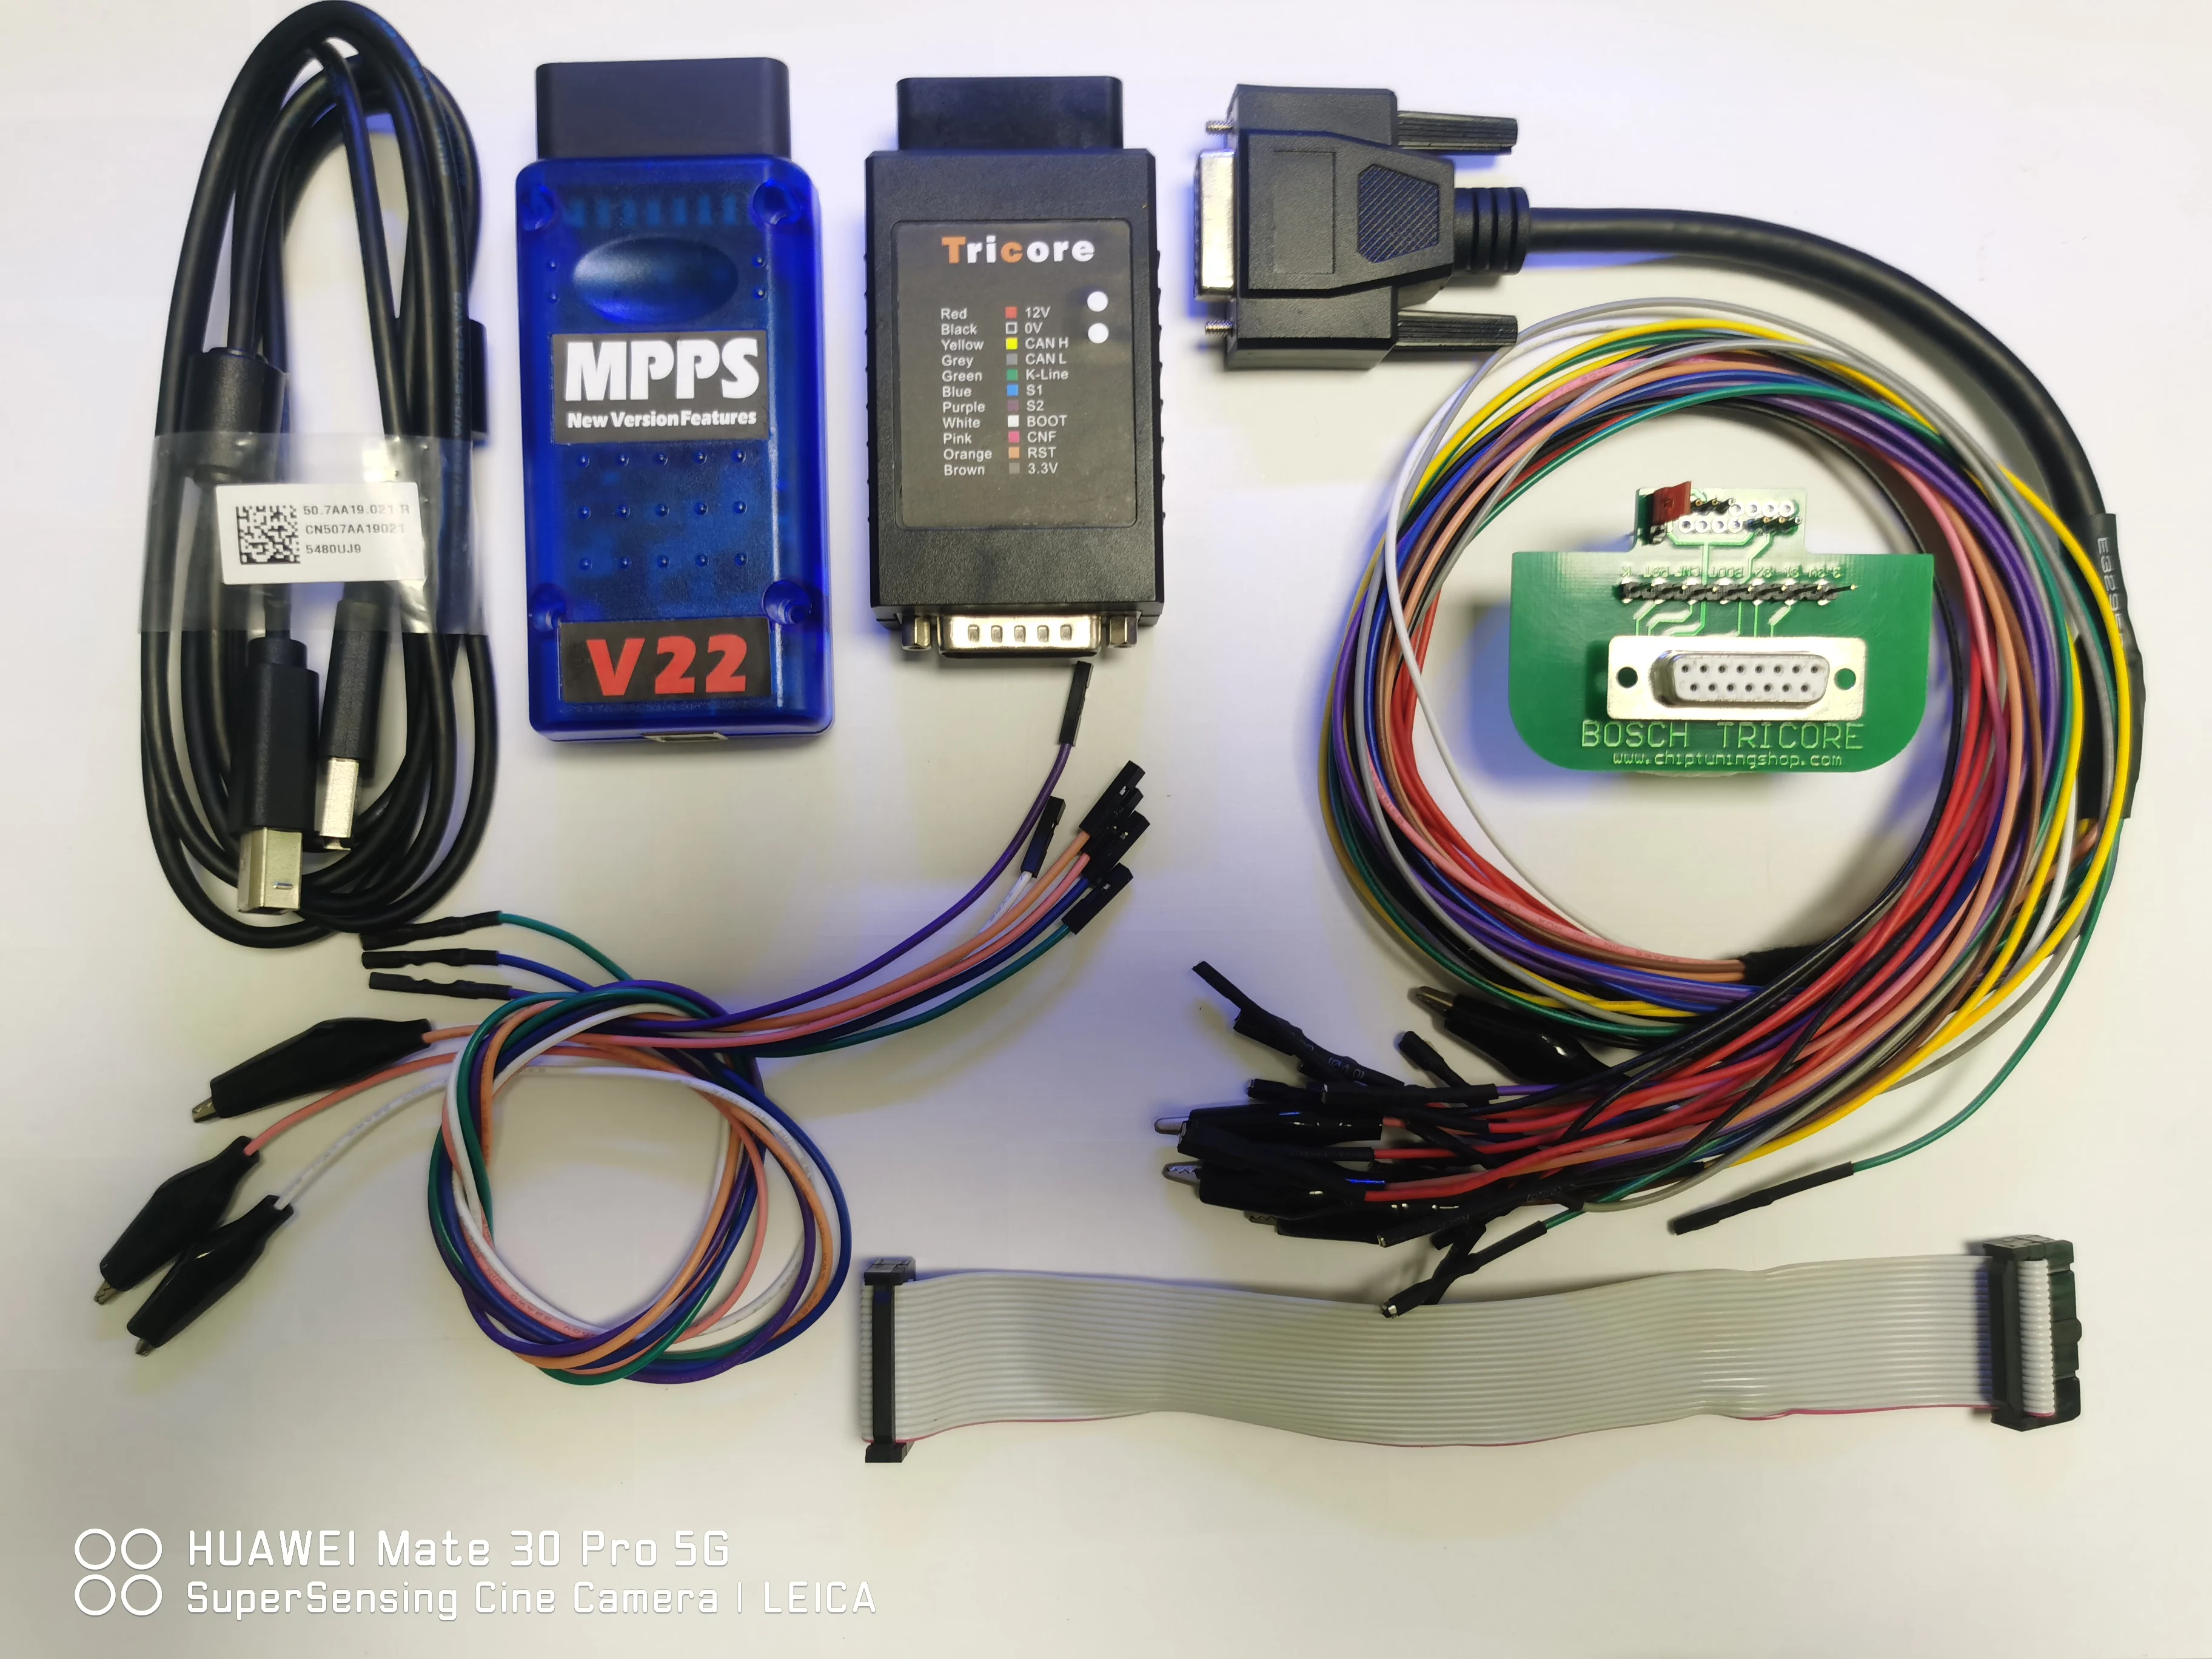 2022 New product MPPS V22 Master Tricore+Multiboot+Breakout Tricore Cable+Bench Pinout  Cable no limit Perfect kit